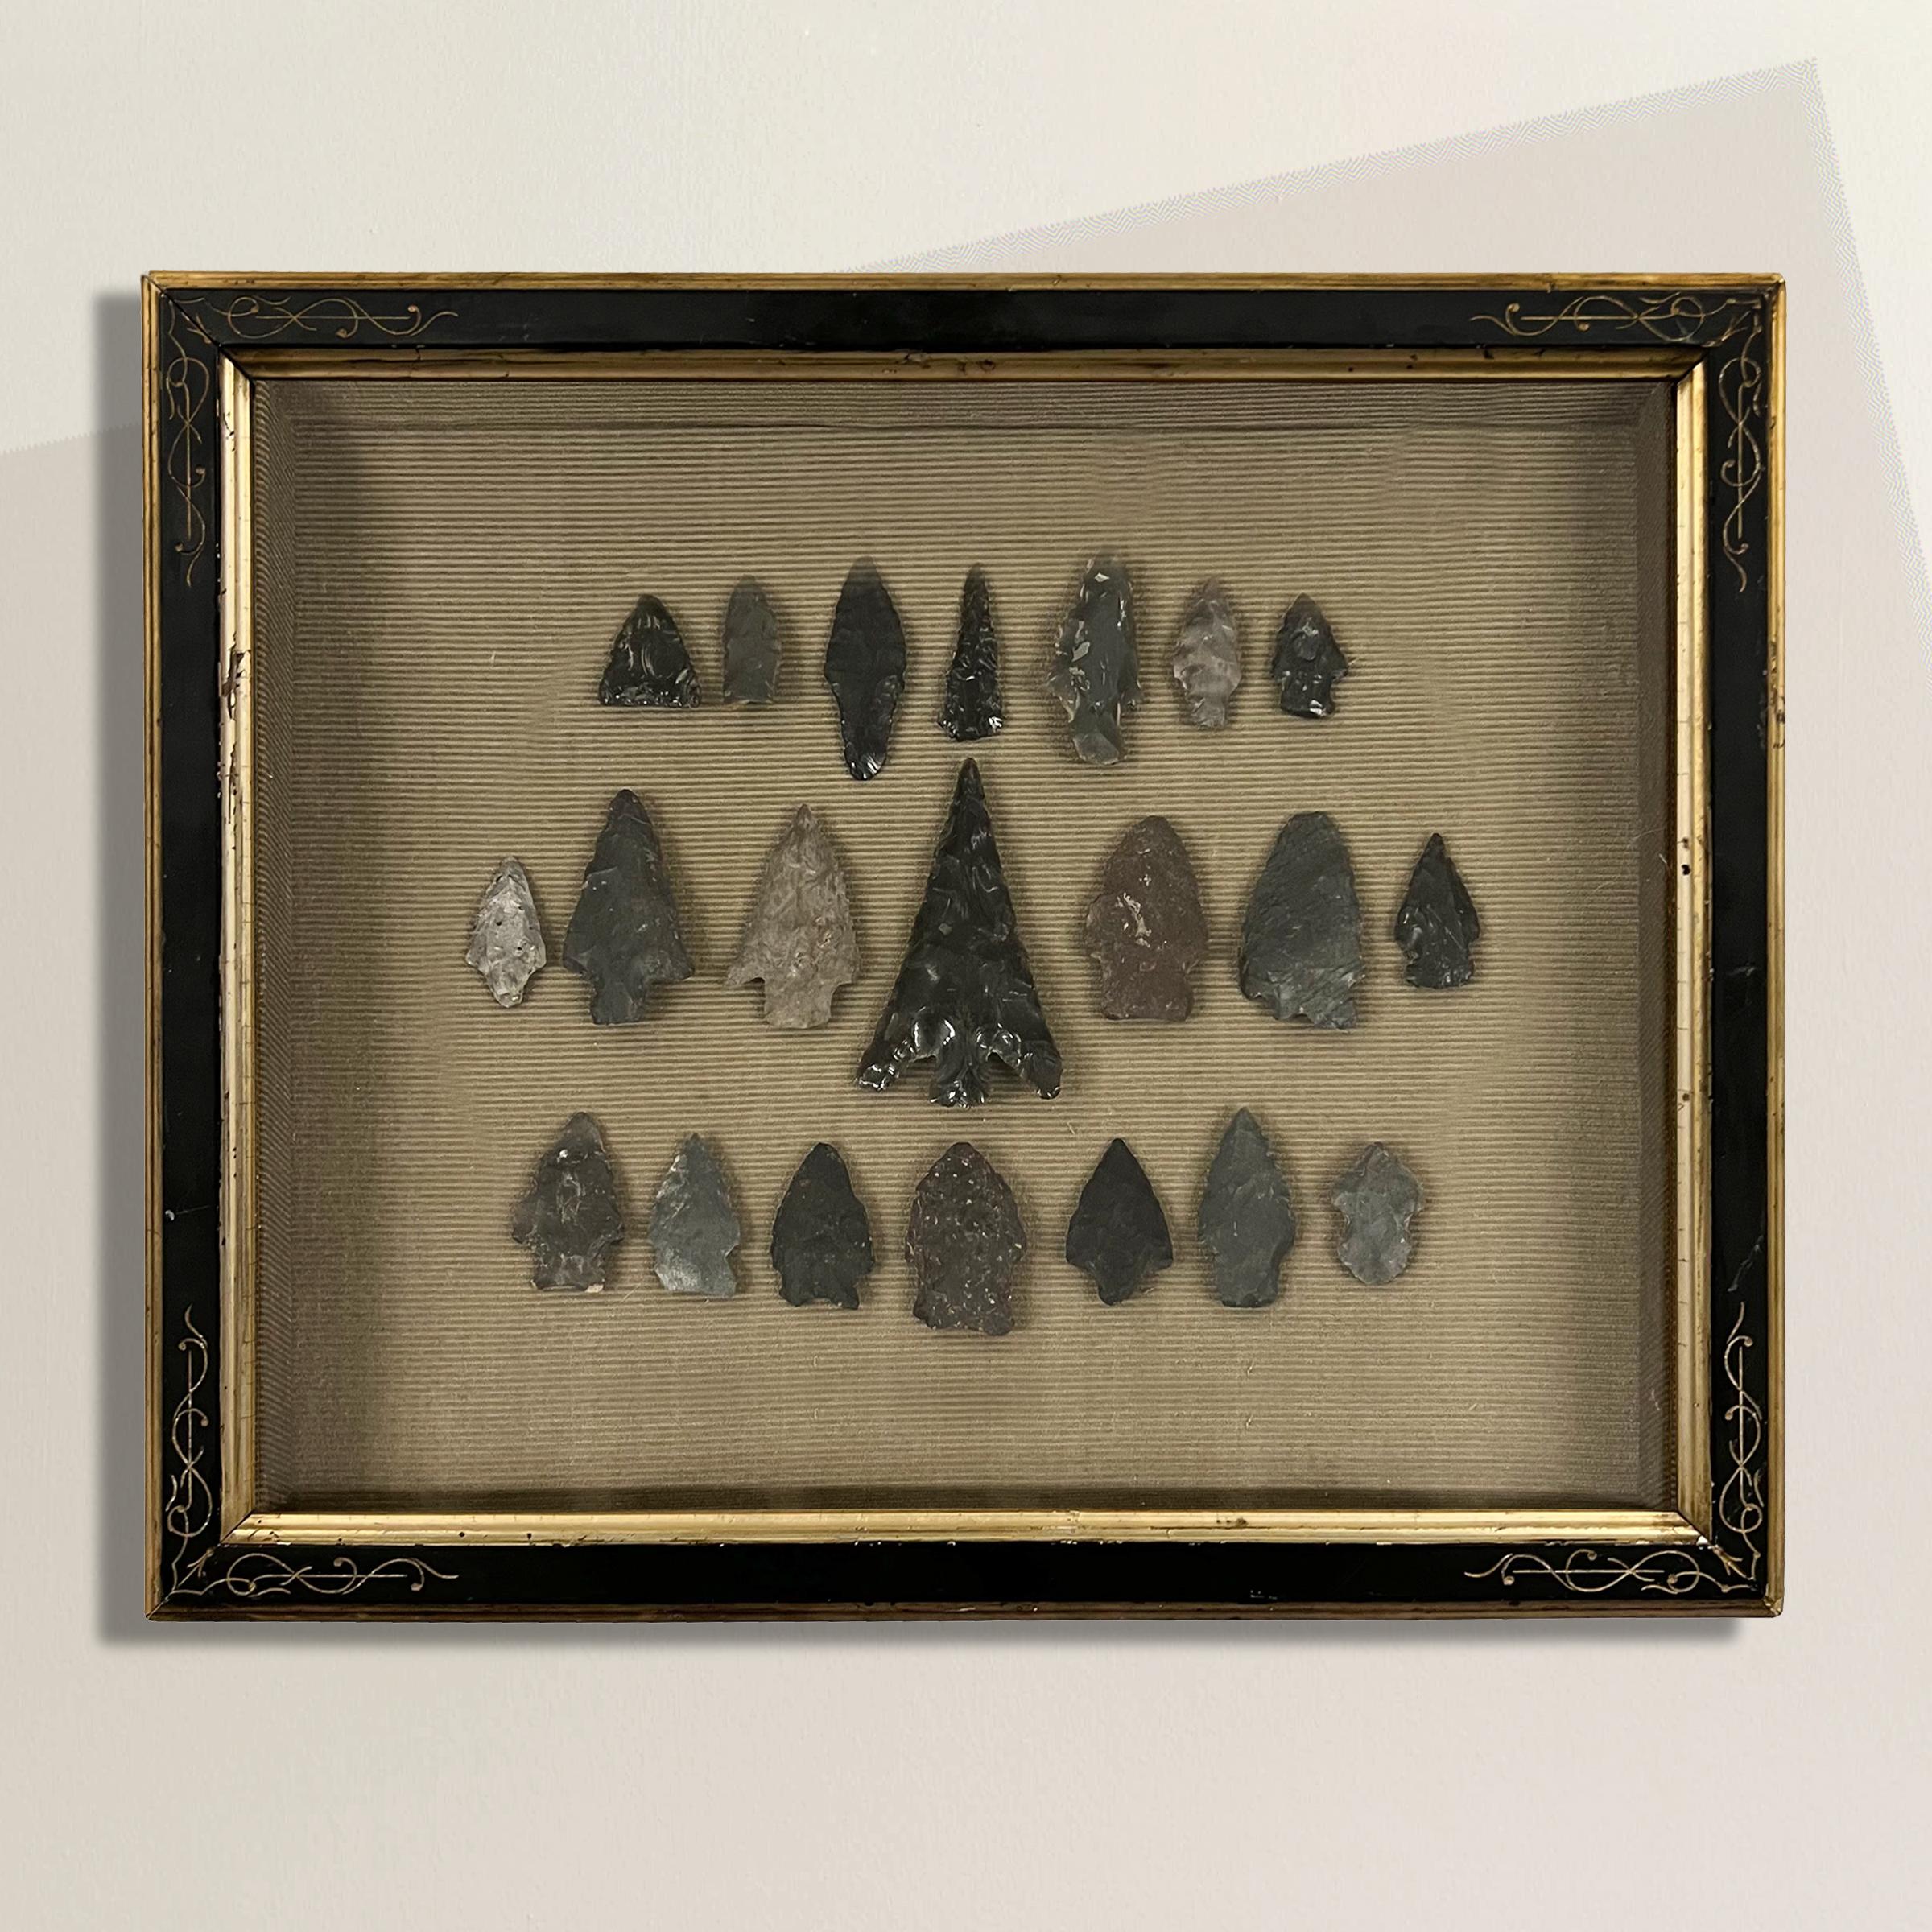 An exceptional set of twenty-one obsidian and flint arrowheads, discovered in Wisconsin's Waukesha County and framed within a 19th-century ebonized Eastlake shadowbox, these arrowheads not only capture the beauty of their craftsmanship but also